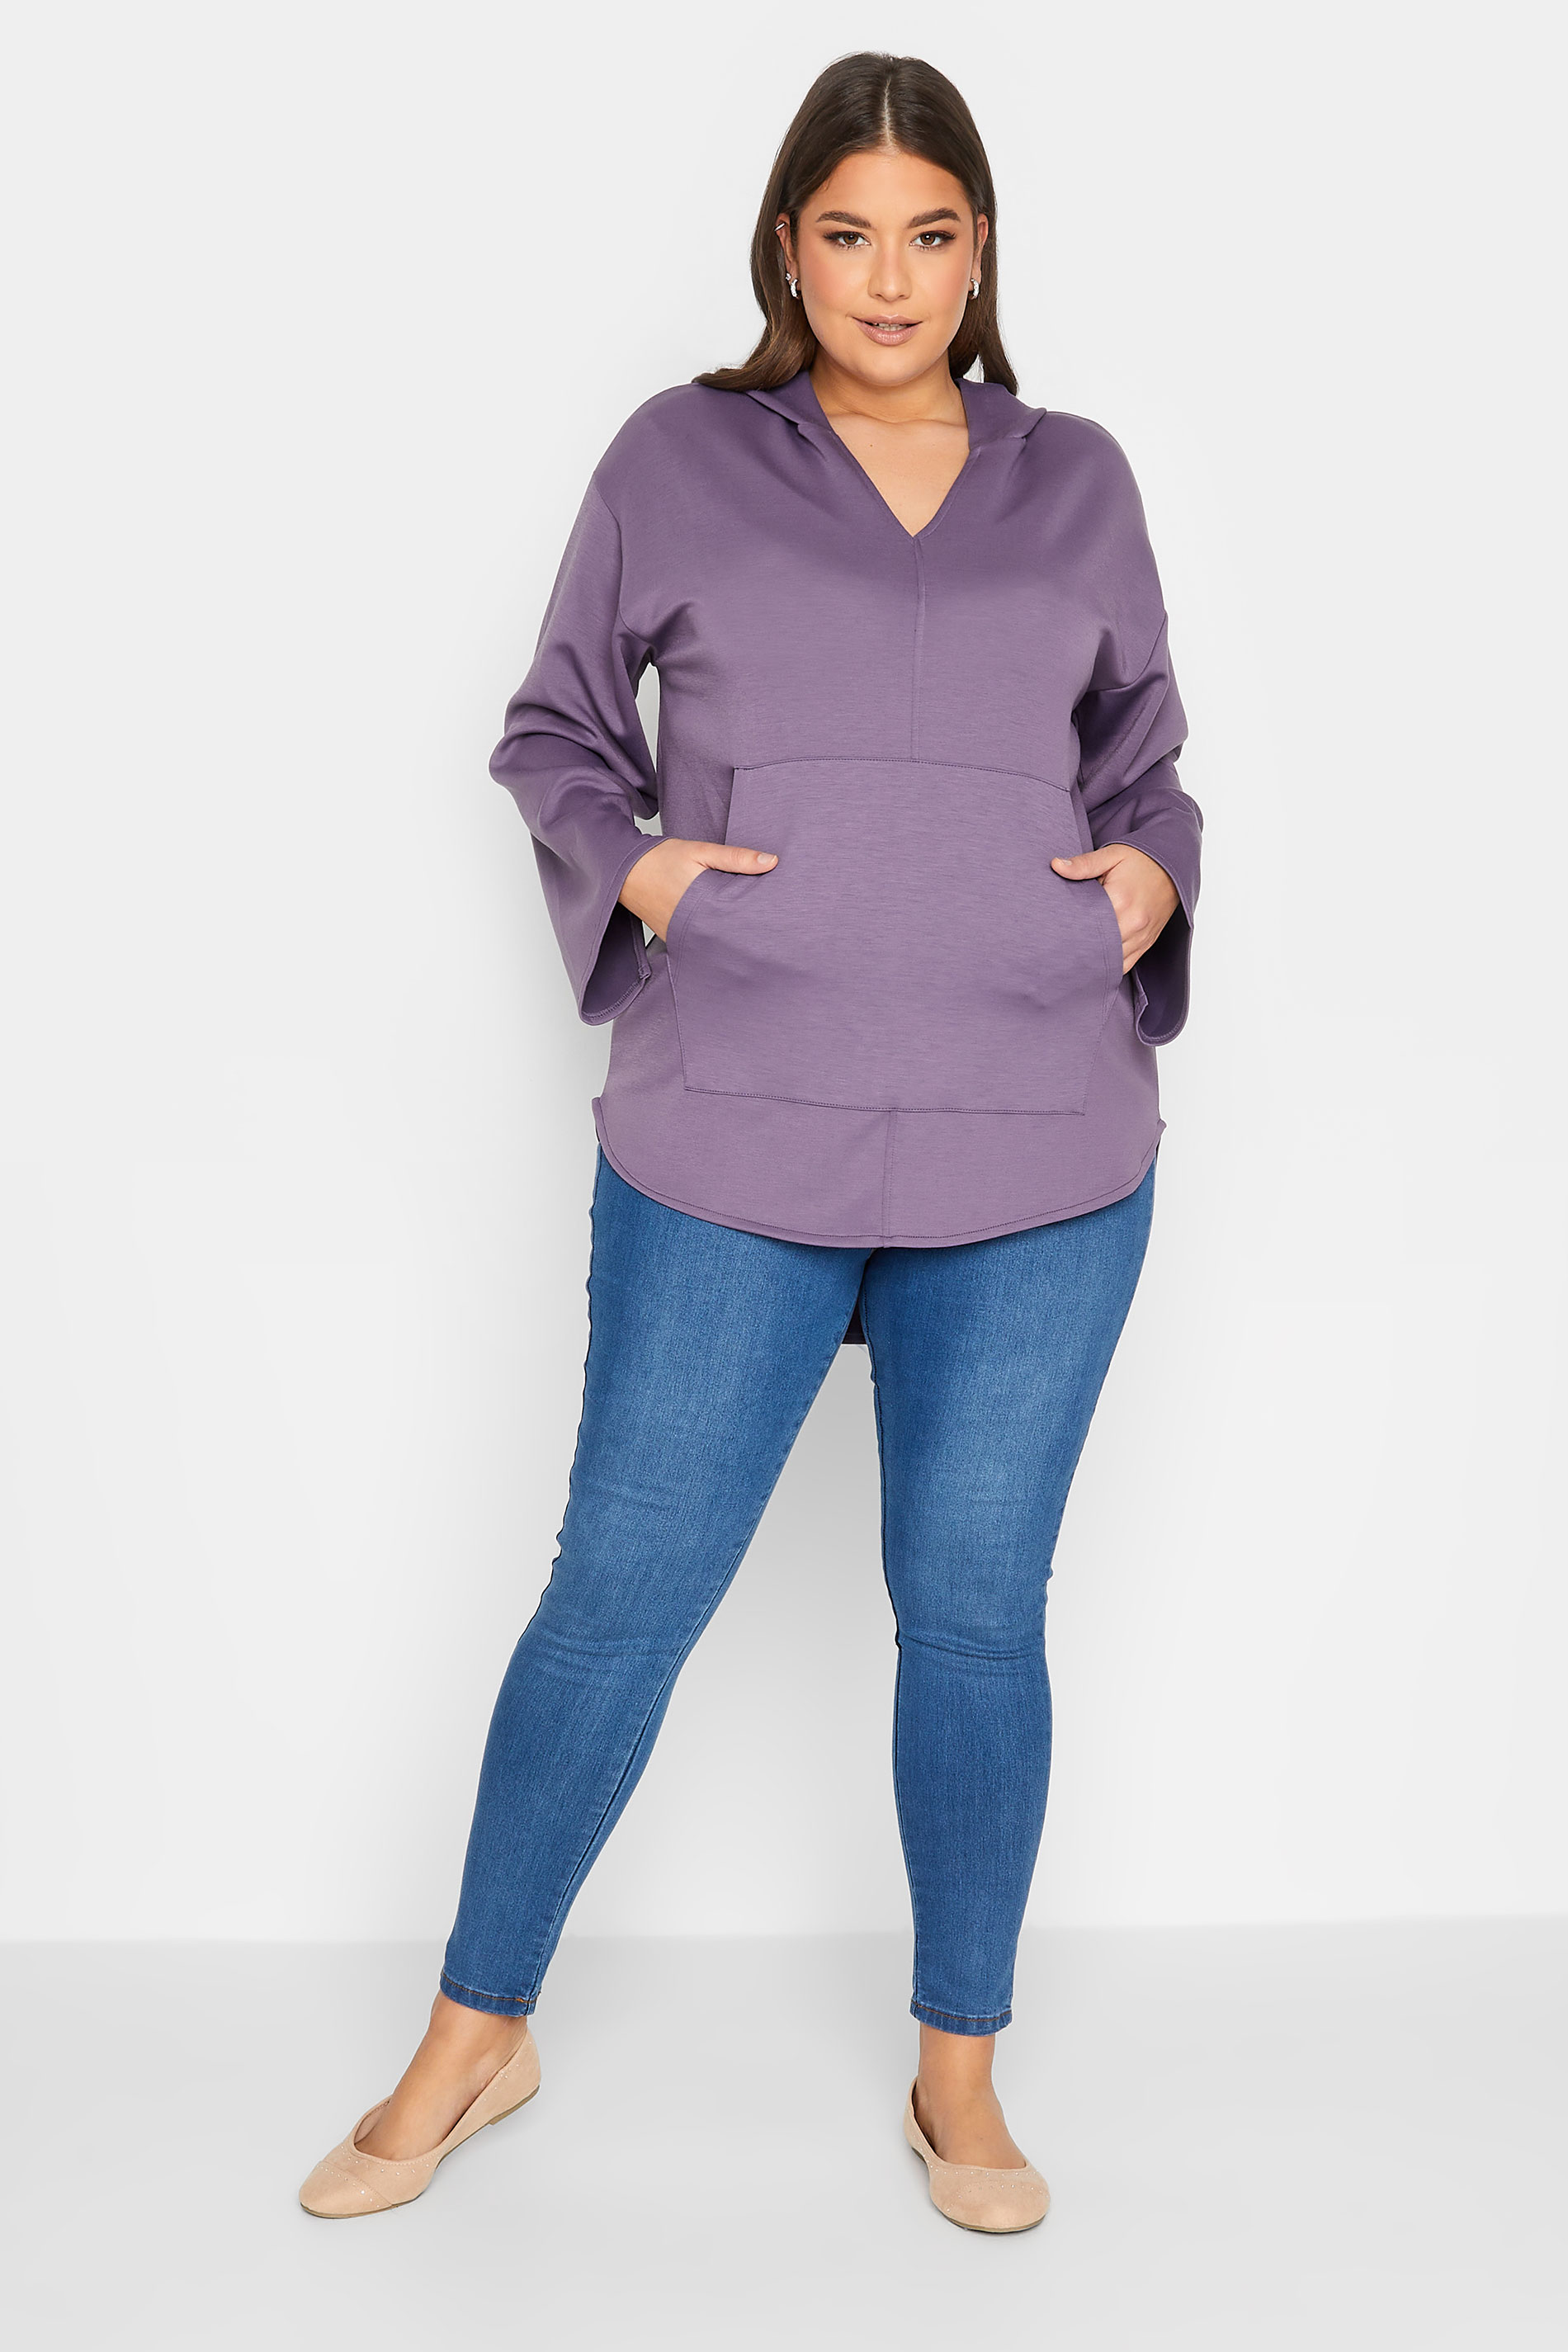 YOURS LUXURY Plus Size Purple V-Neck Jersey Hoodie | Yours Clothing  2